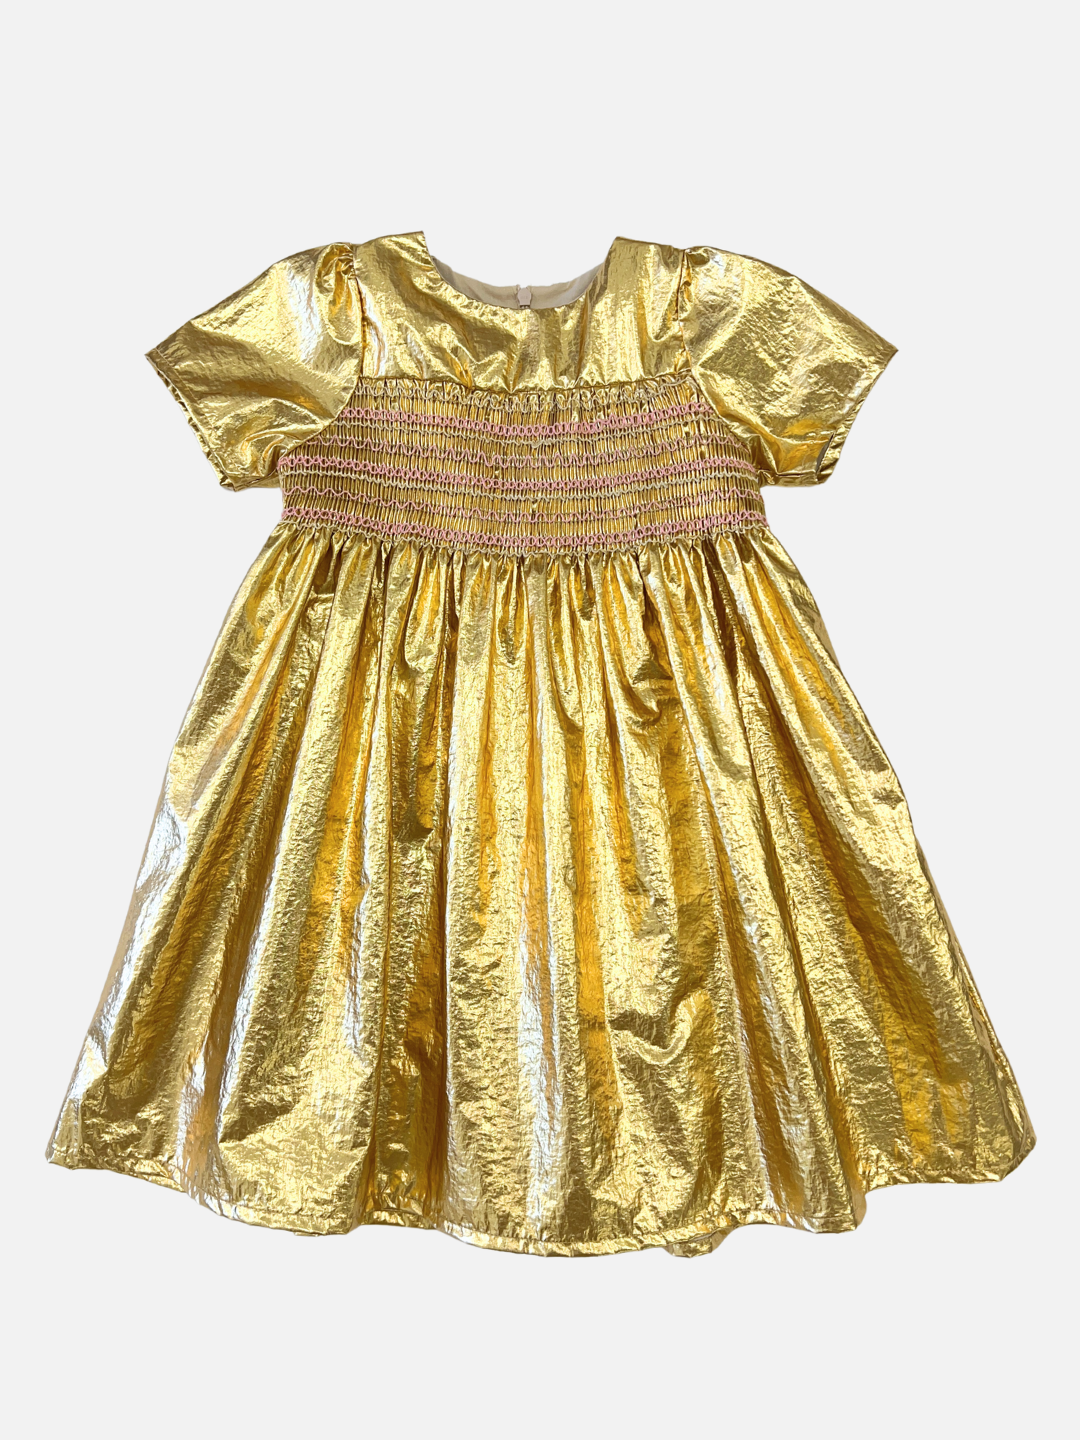 Kids party dress in yellow gold metallic fabric with a round neck, short sleeves, smocked bodice, empire waist and full skirt.